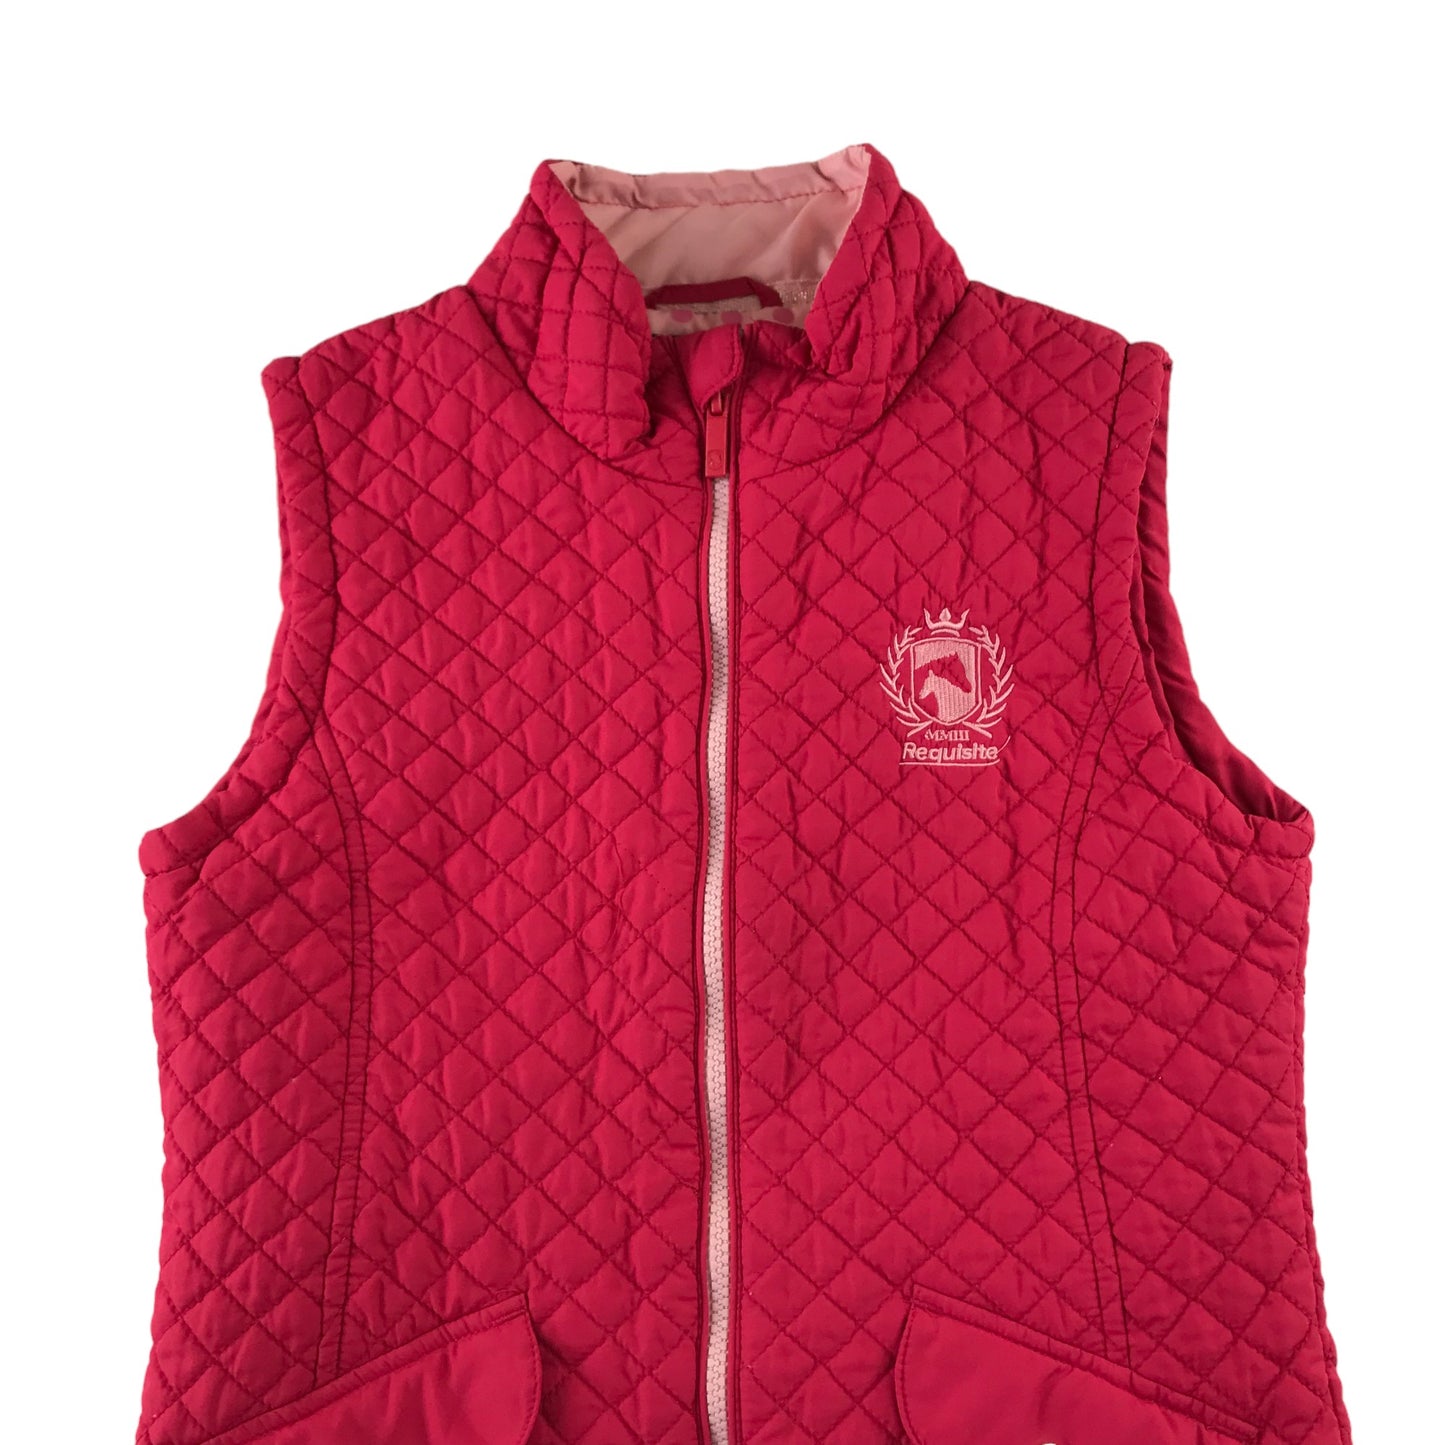 Requisite England gilet 11-12 years pink quilted lightly padded